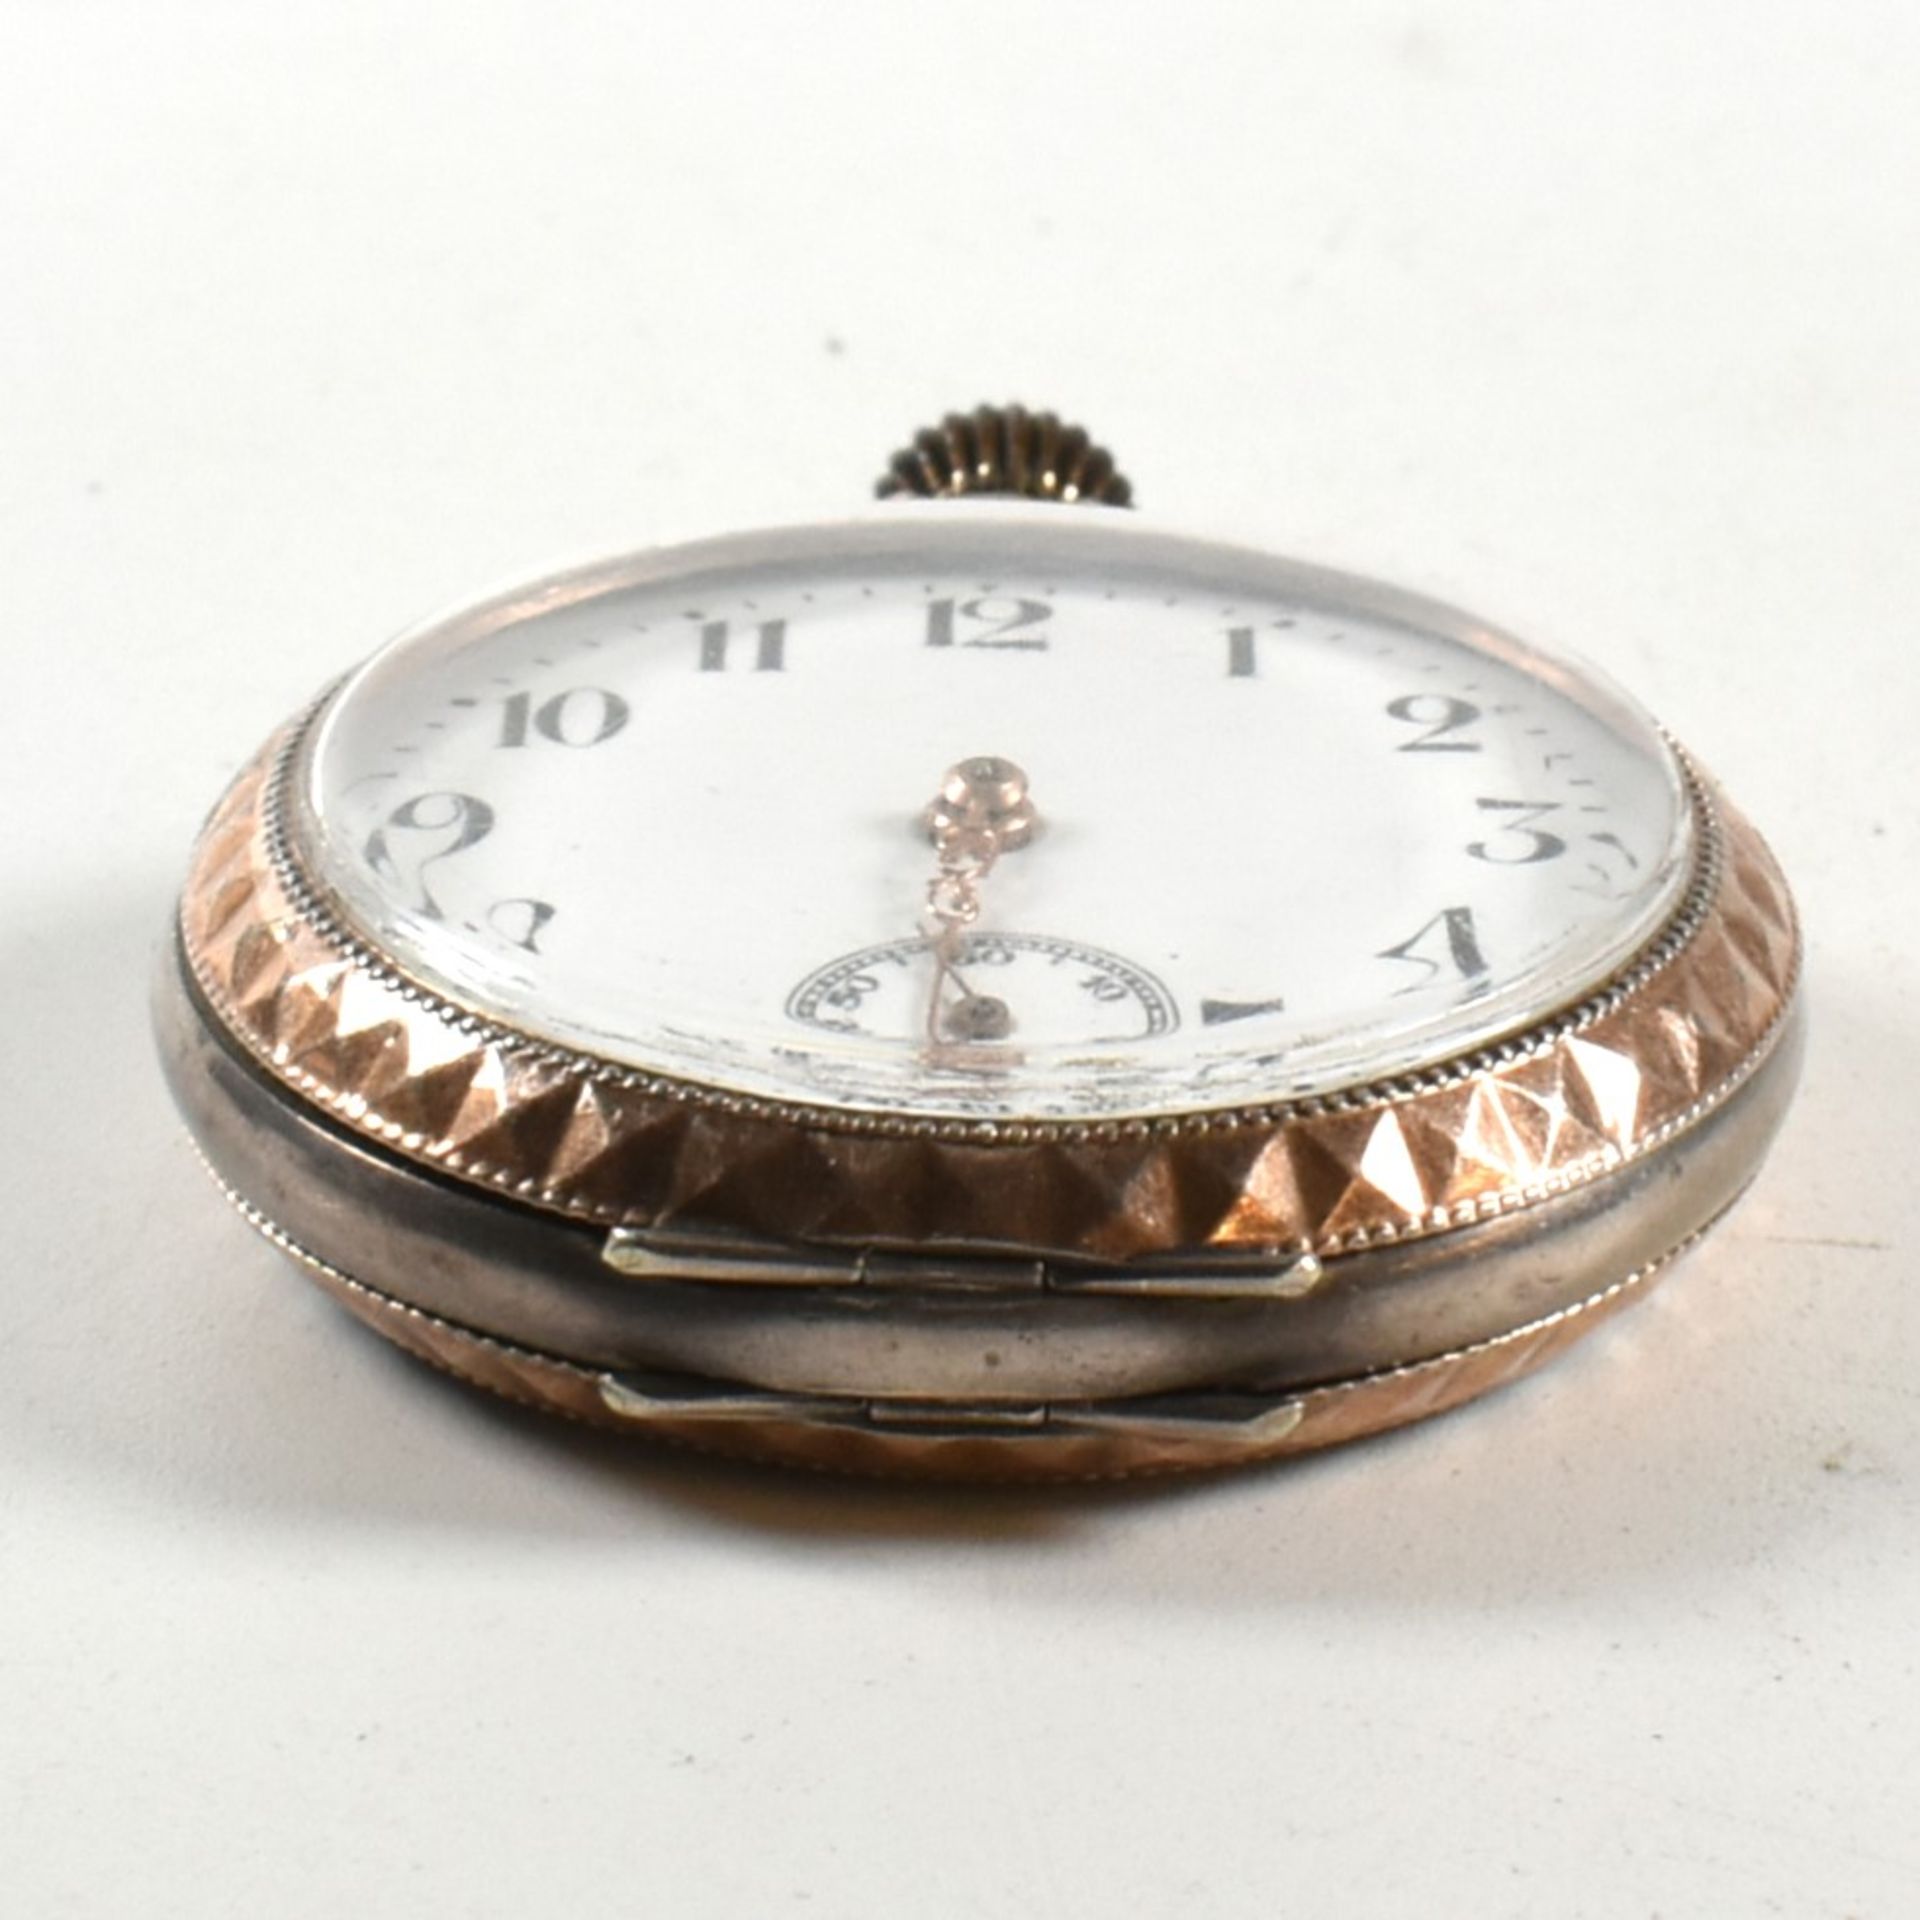 SILVER 800 CONTINENTAL OPEN FACED CROWN WIND POCKET WATCH - Image 7 of 8